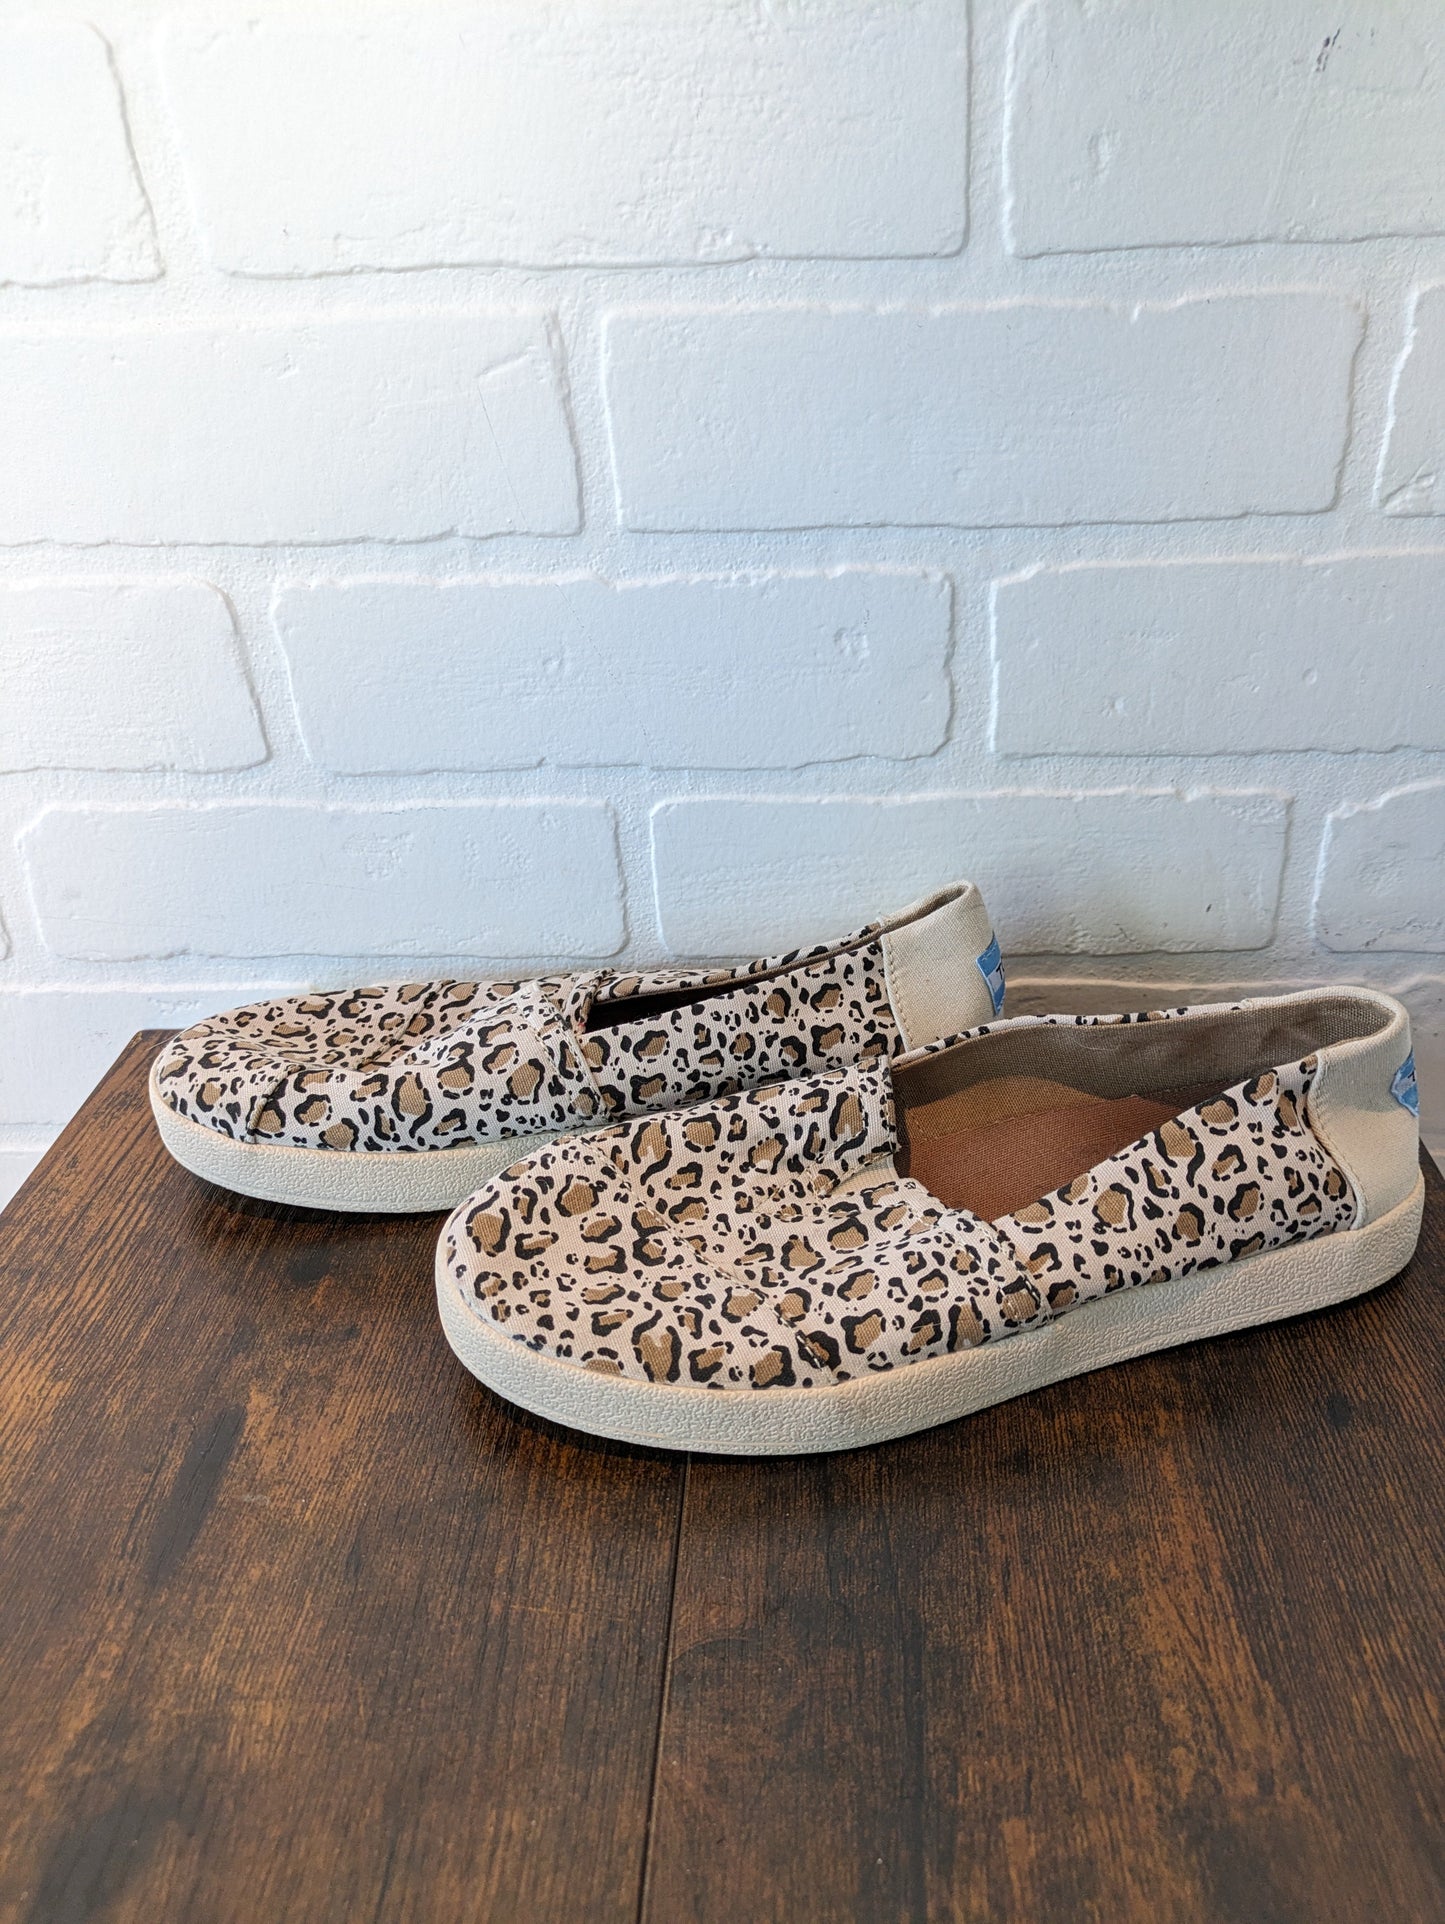 Animal Print Shoes Flats Toms, Size 6.5